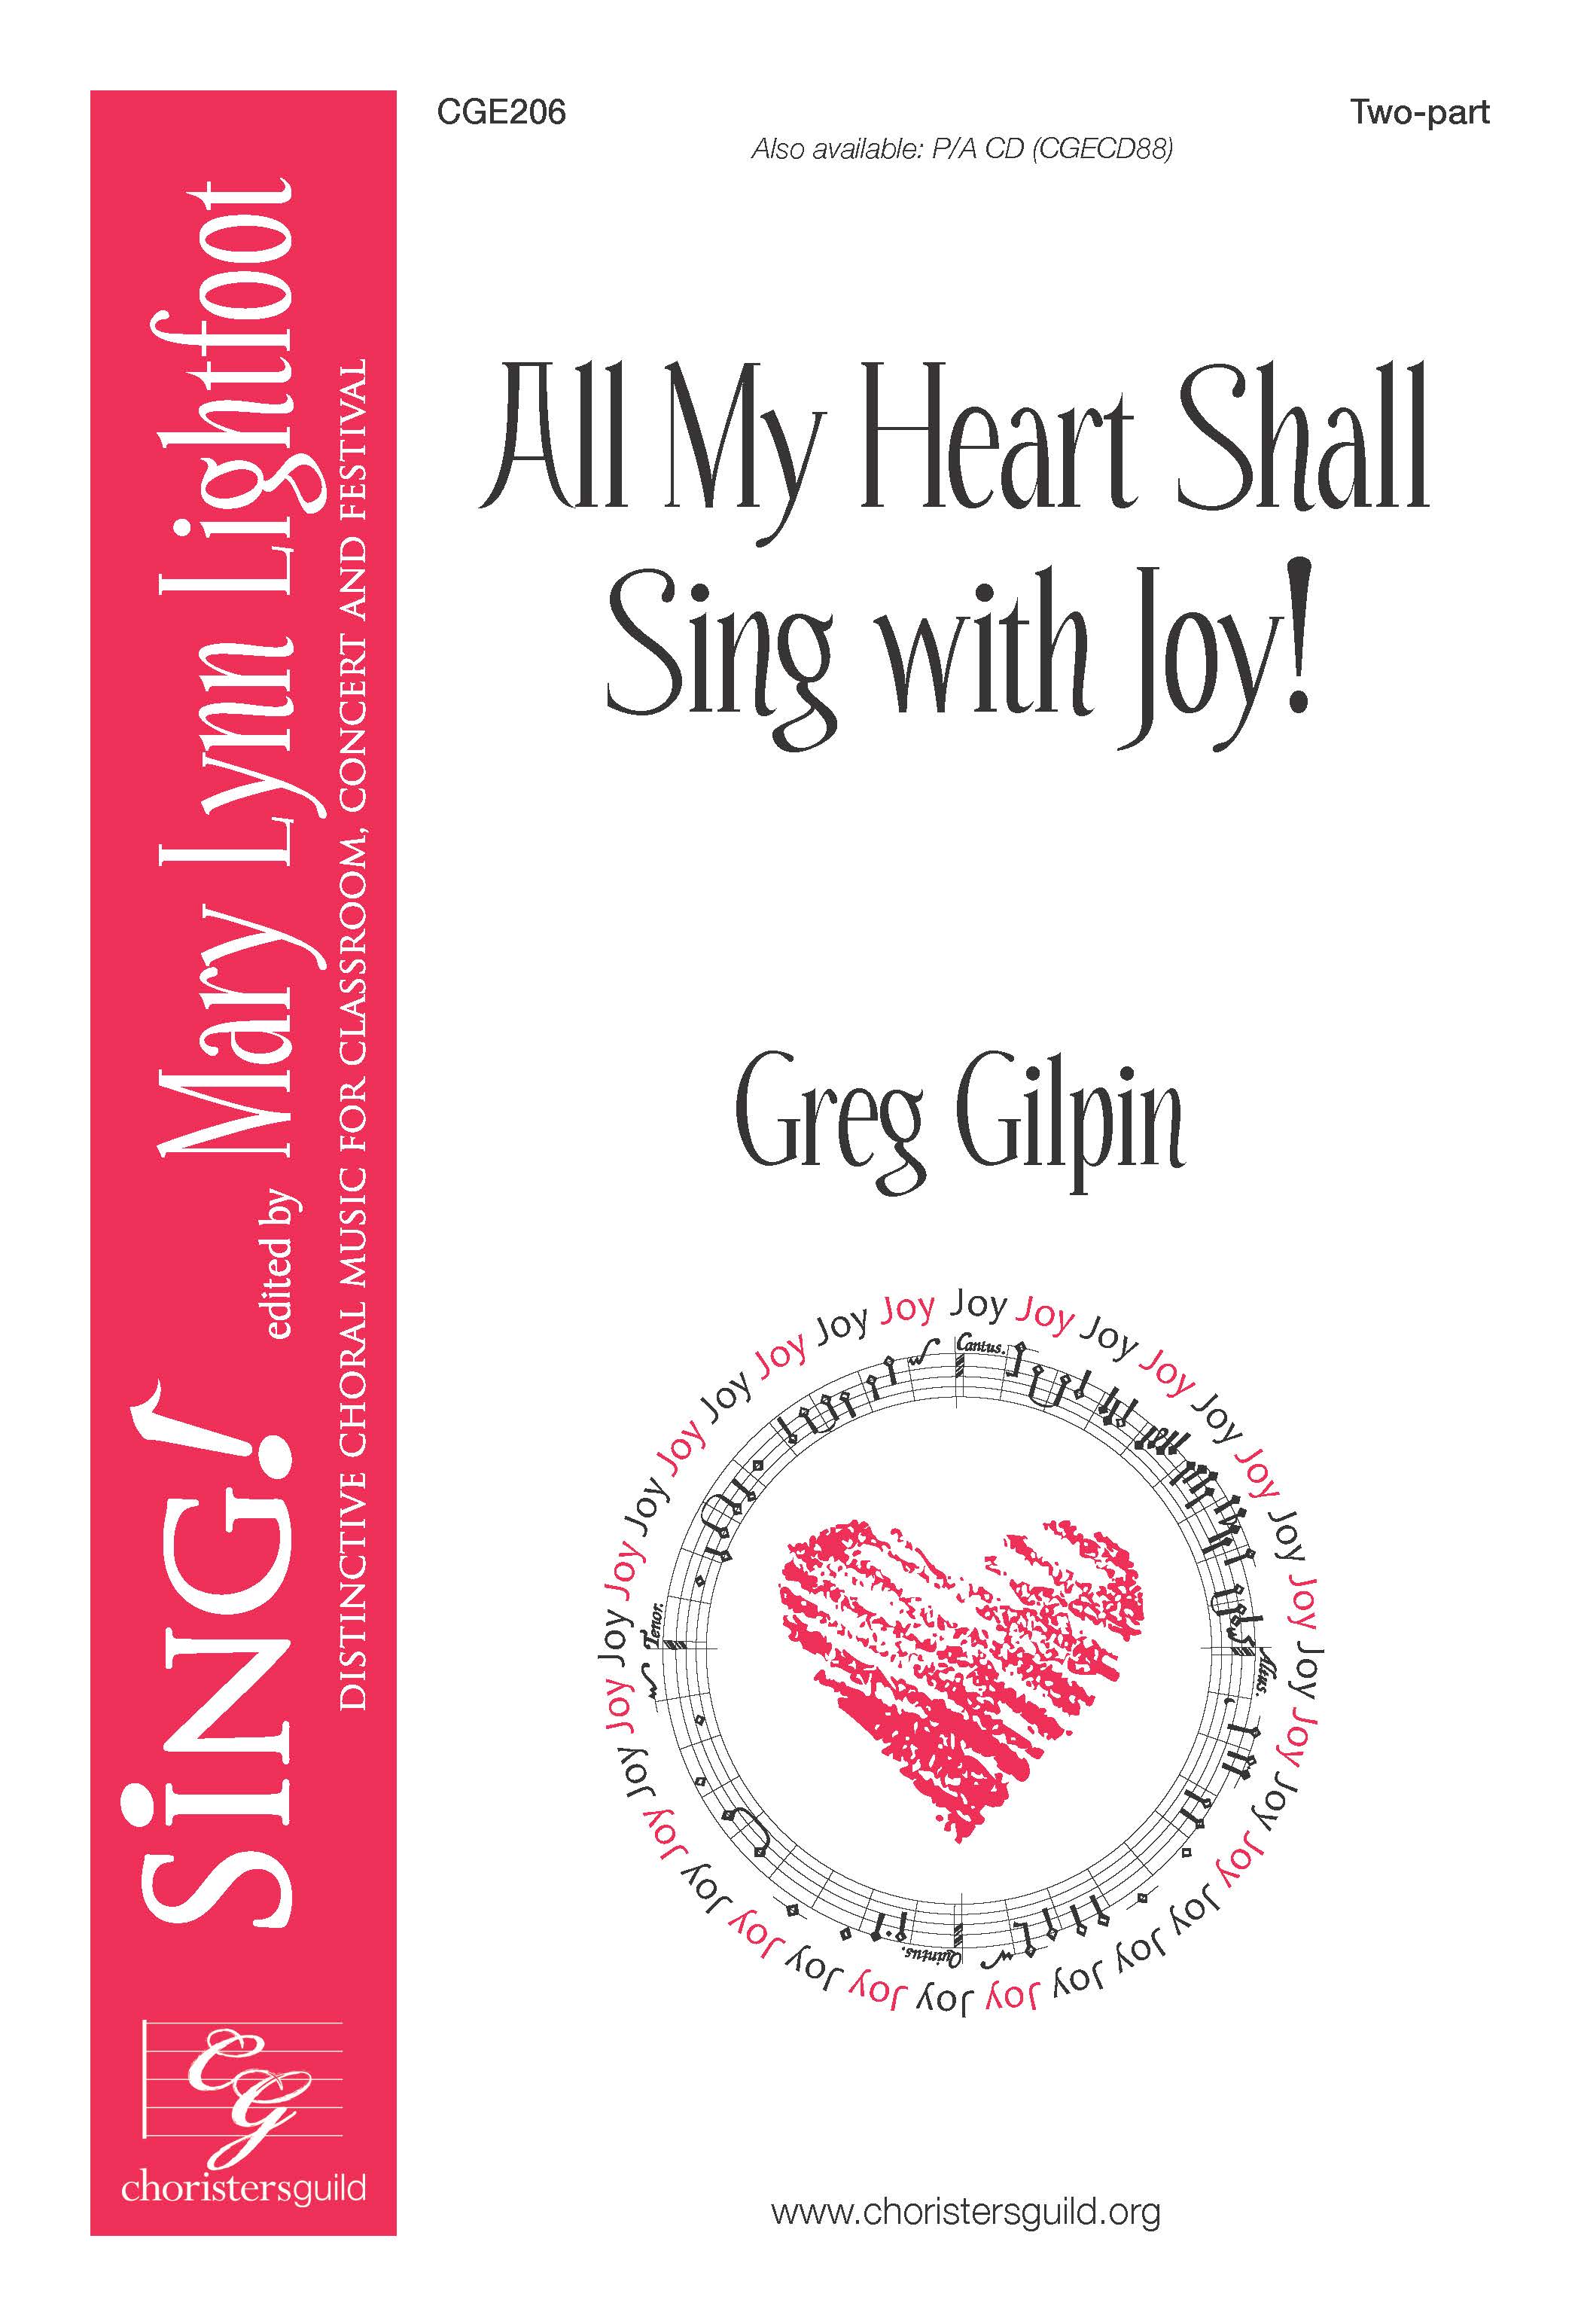 All My Heart Shall Sing with Joy! Two-part